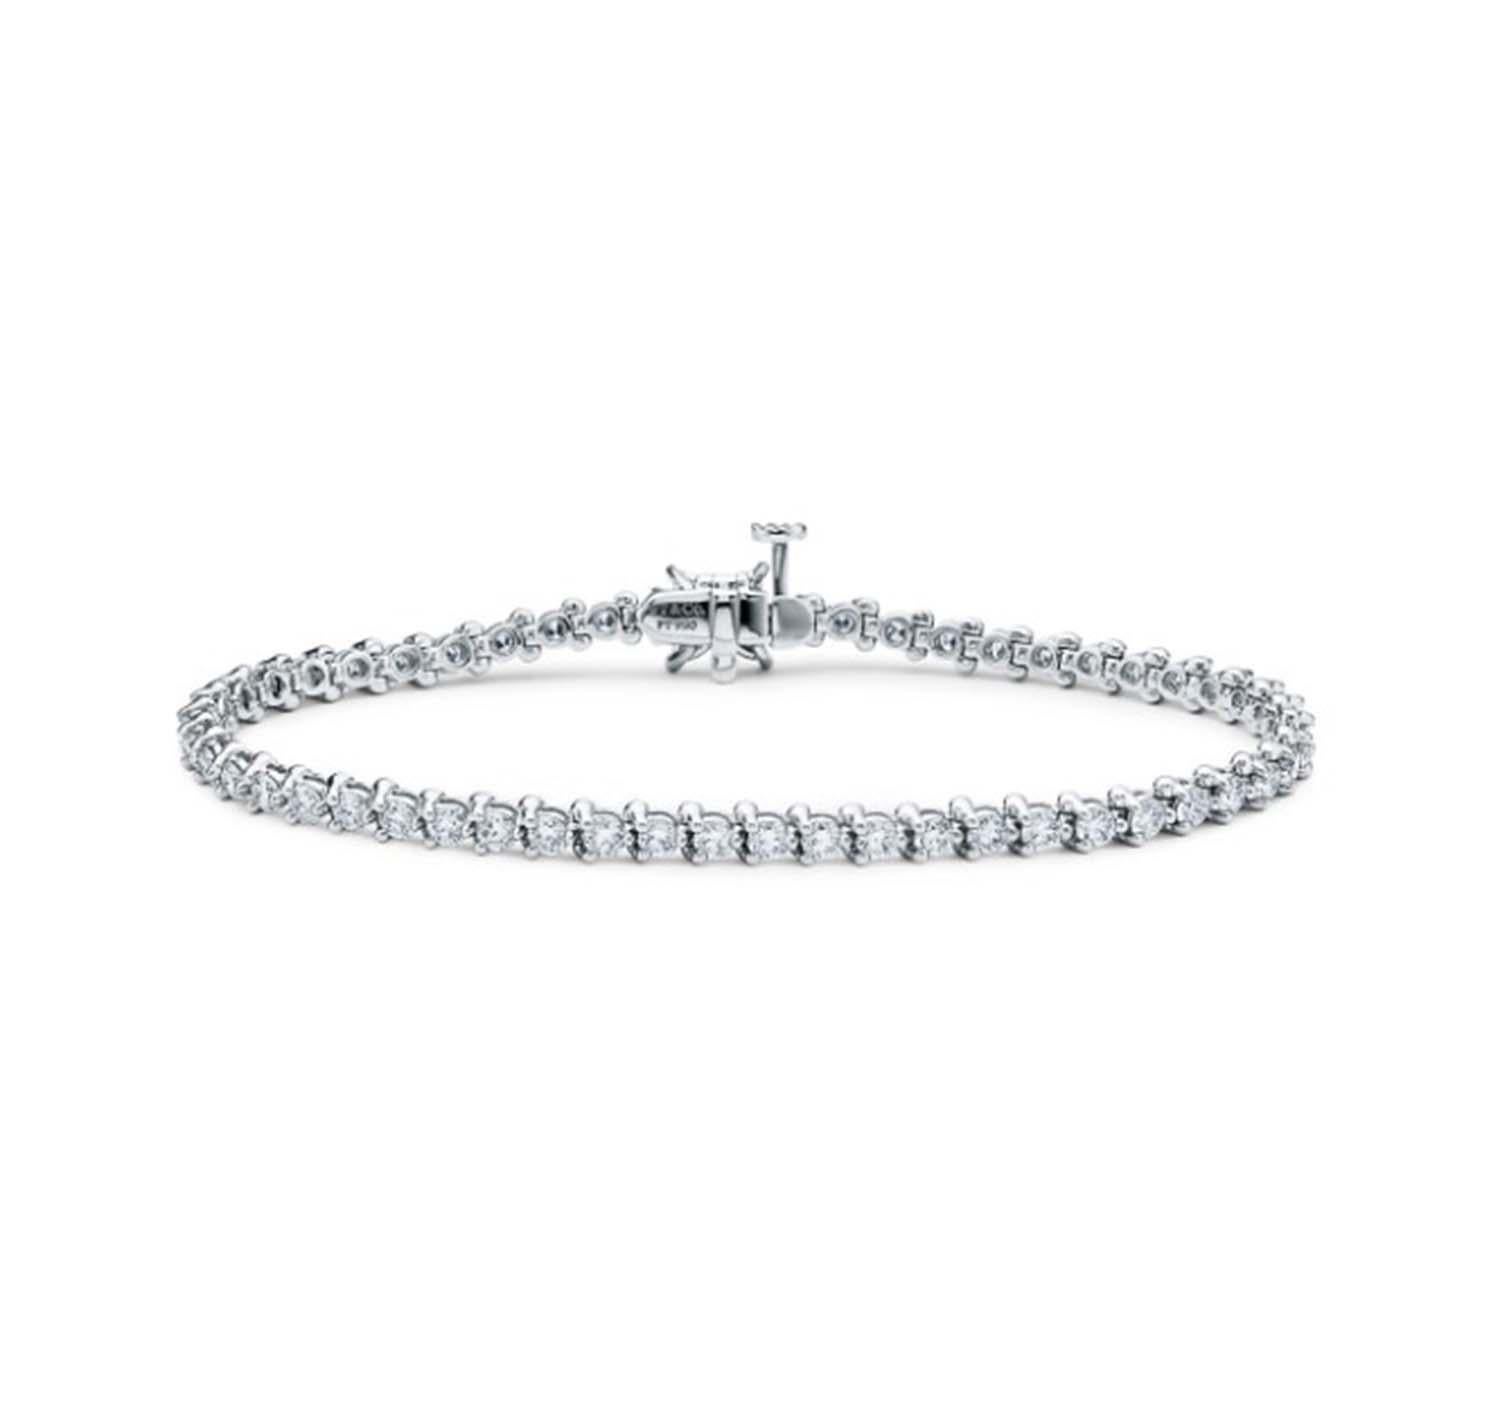 Brand: Tiffany & Co.

Model Name: Victoria 

Metal: Platinum

Metal Purity: 950

Stone: 55 Round Brilliant Cut Diamond 

Necklace Length: 7 inches

Total Carat Weight:  4.49 ct 

Total Item Weight (Grams):  12.6 g 

Hallmarks: T & Co. ;